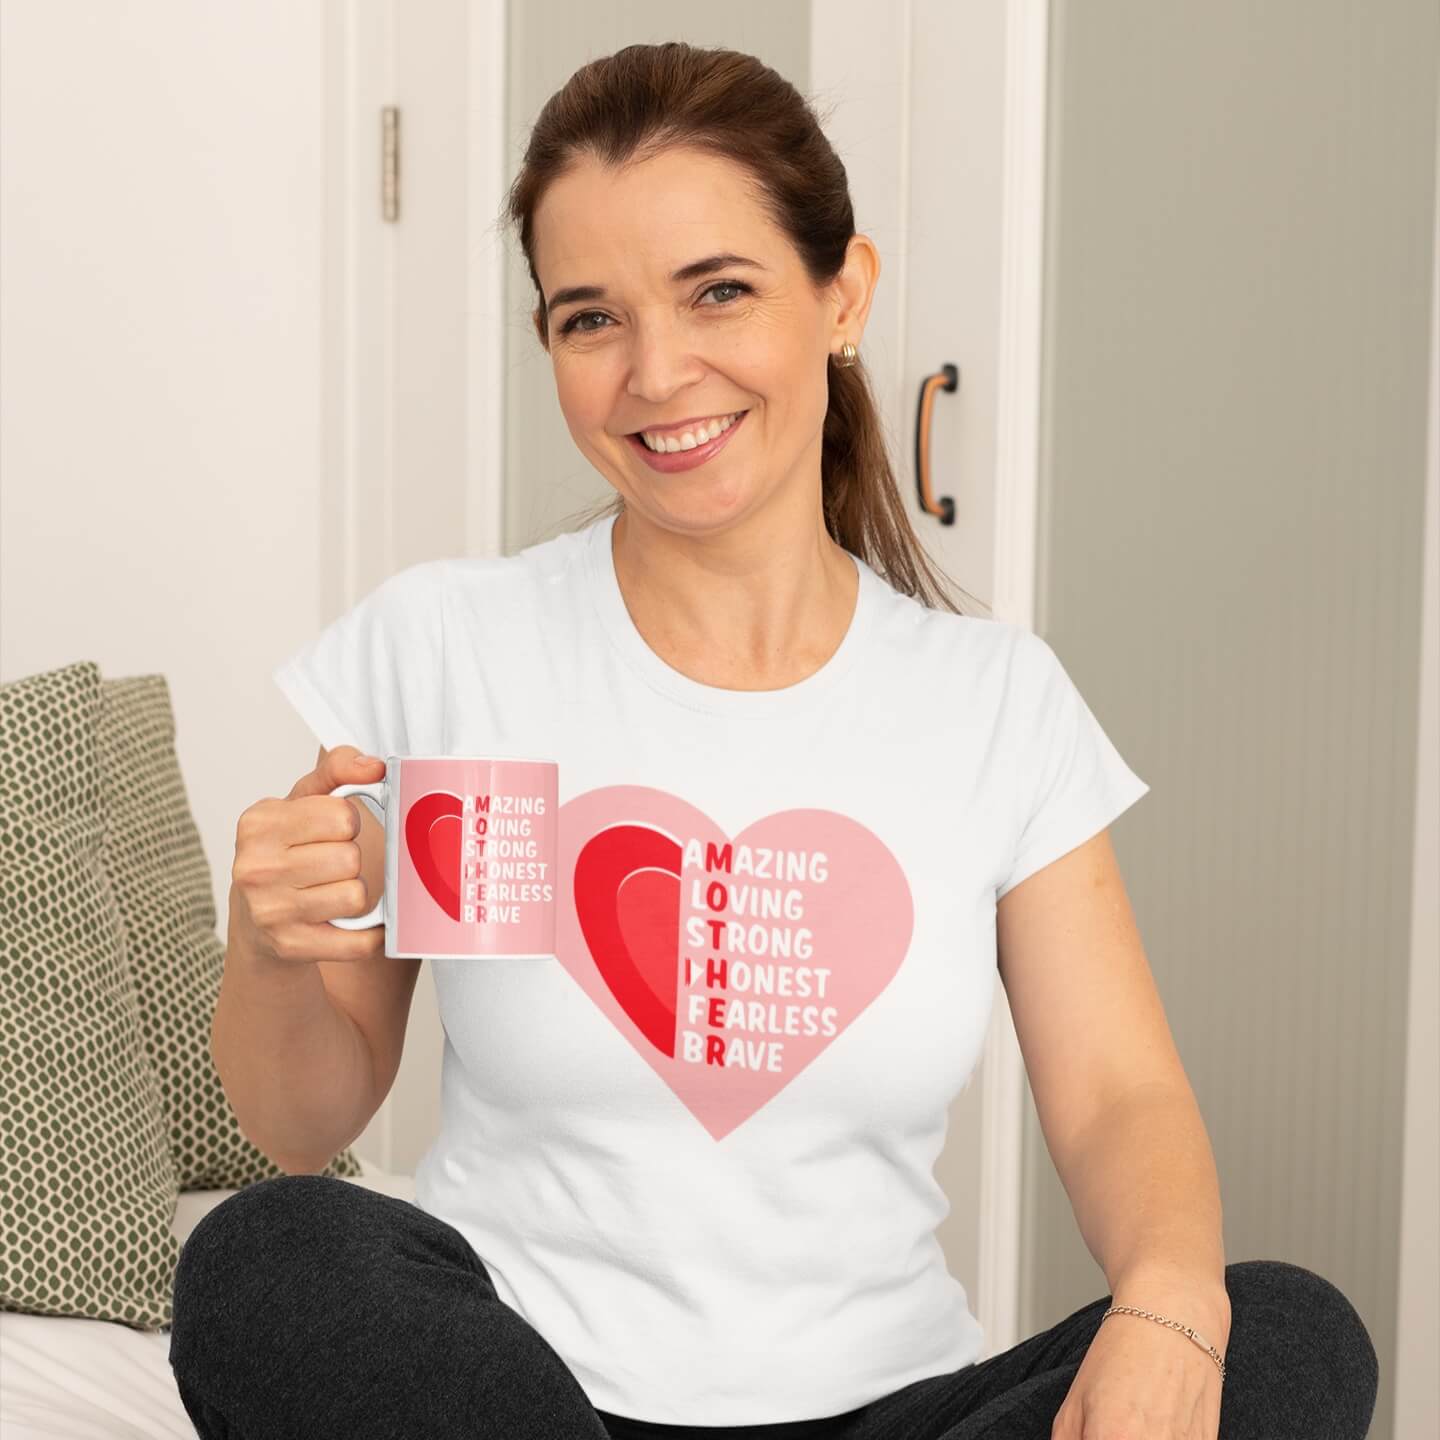 MOTHER T-shirt and mug cup. Best gift for Mother's Day and her birthday.